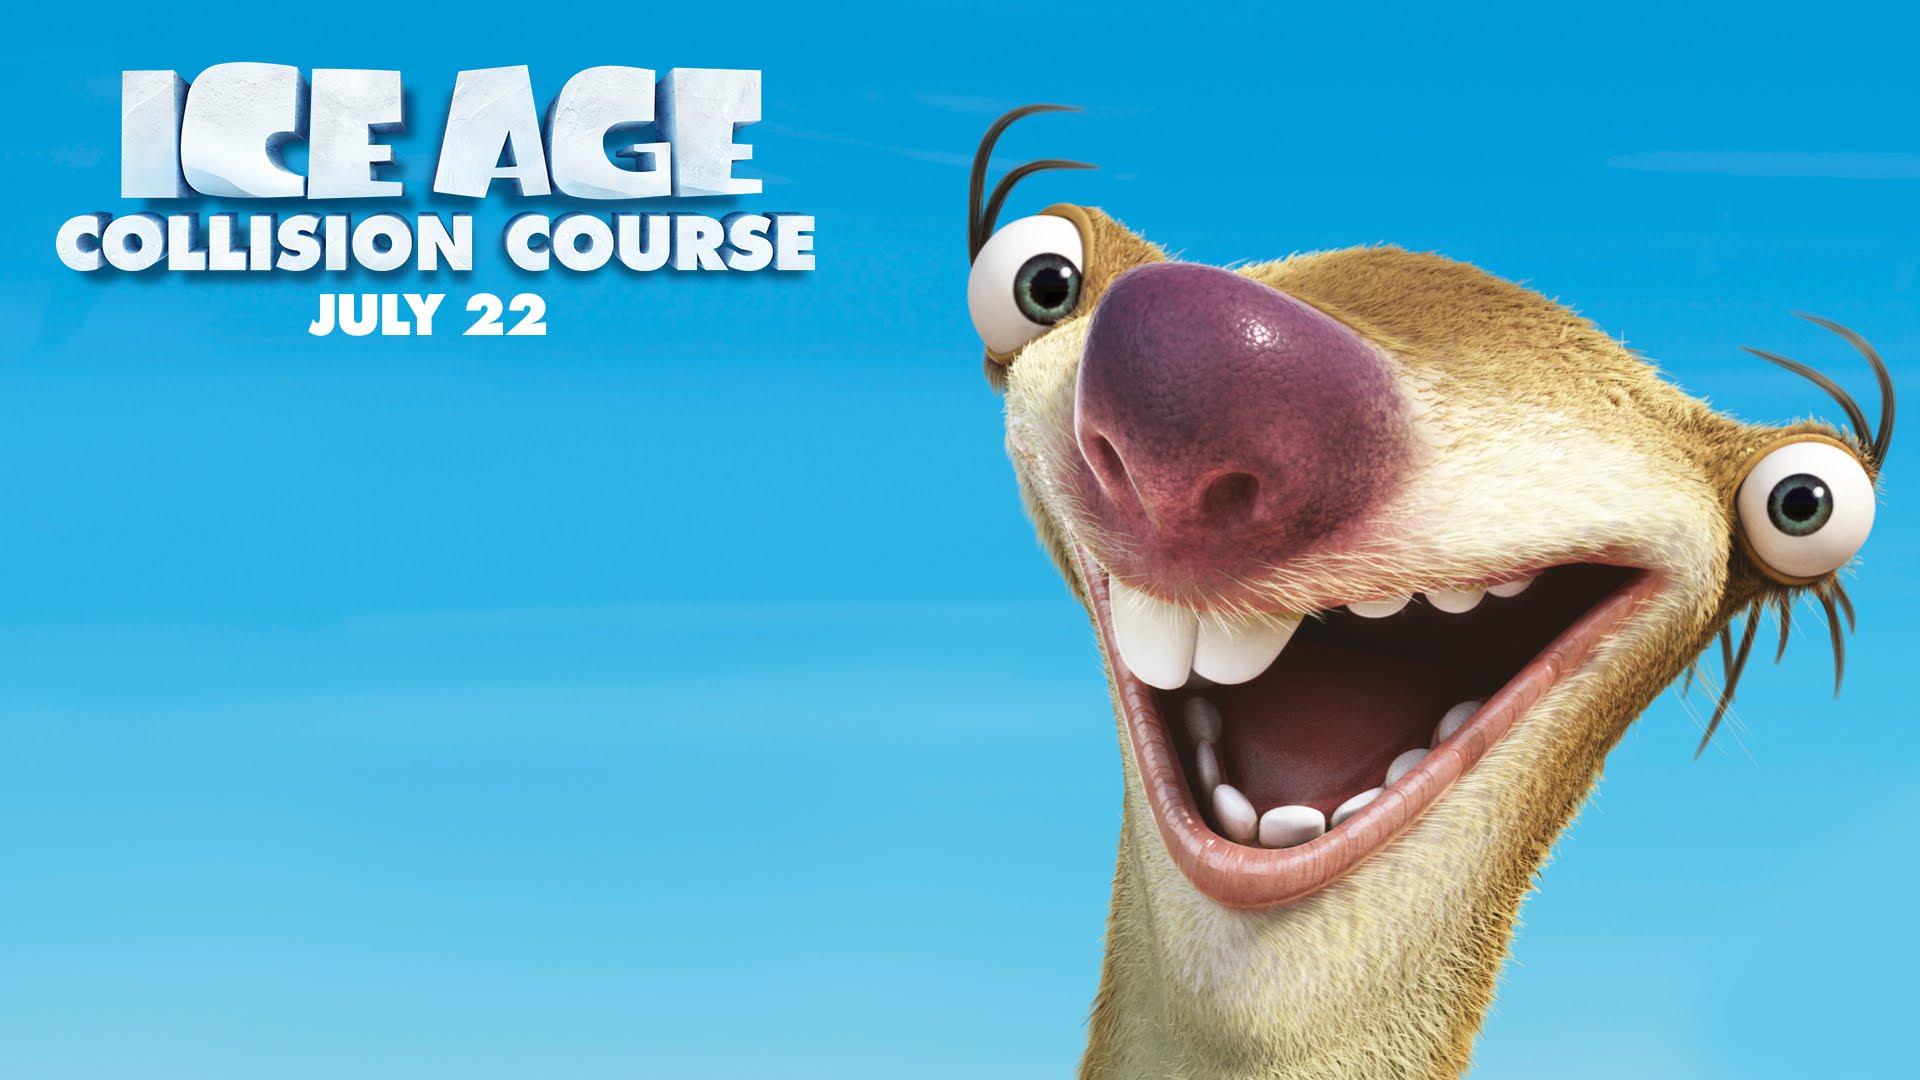 Download Free ice age collision course sid smiling wallpaper. HD